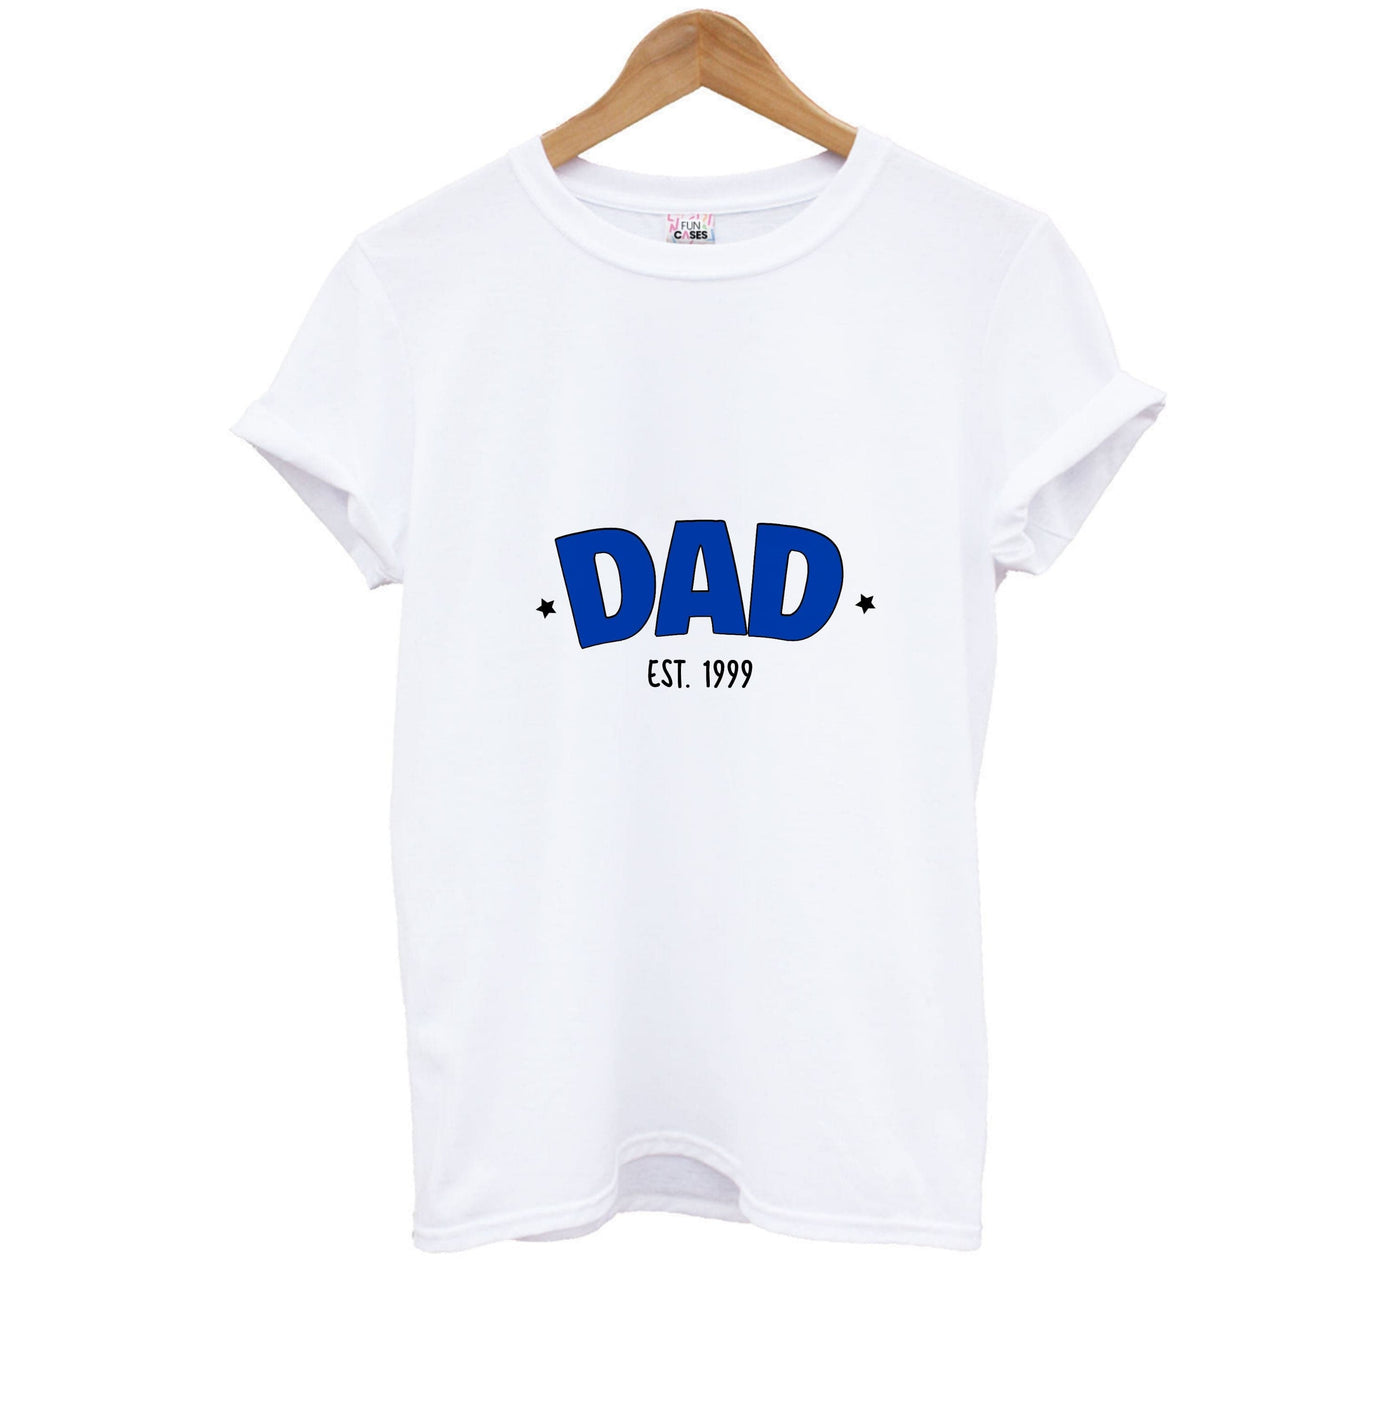 Dad Est - Personalised Father's Day Kids T-Shirt